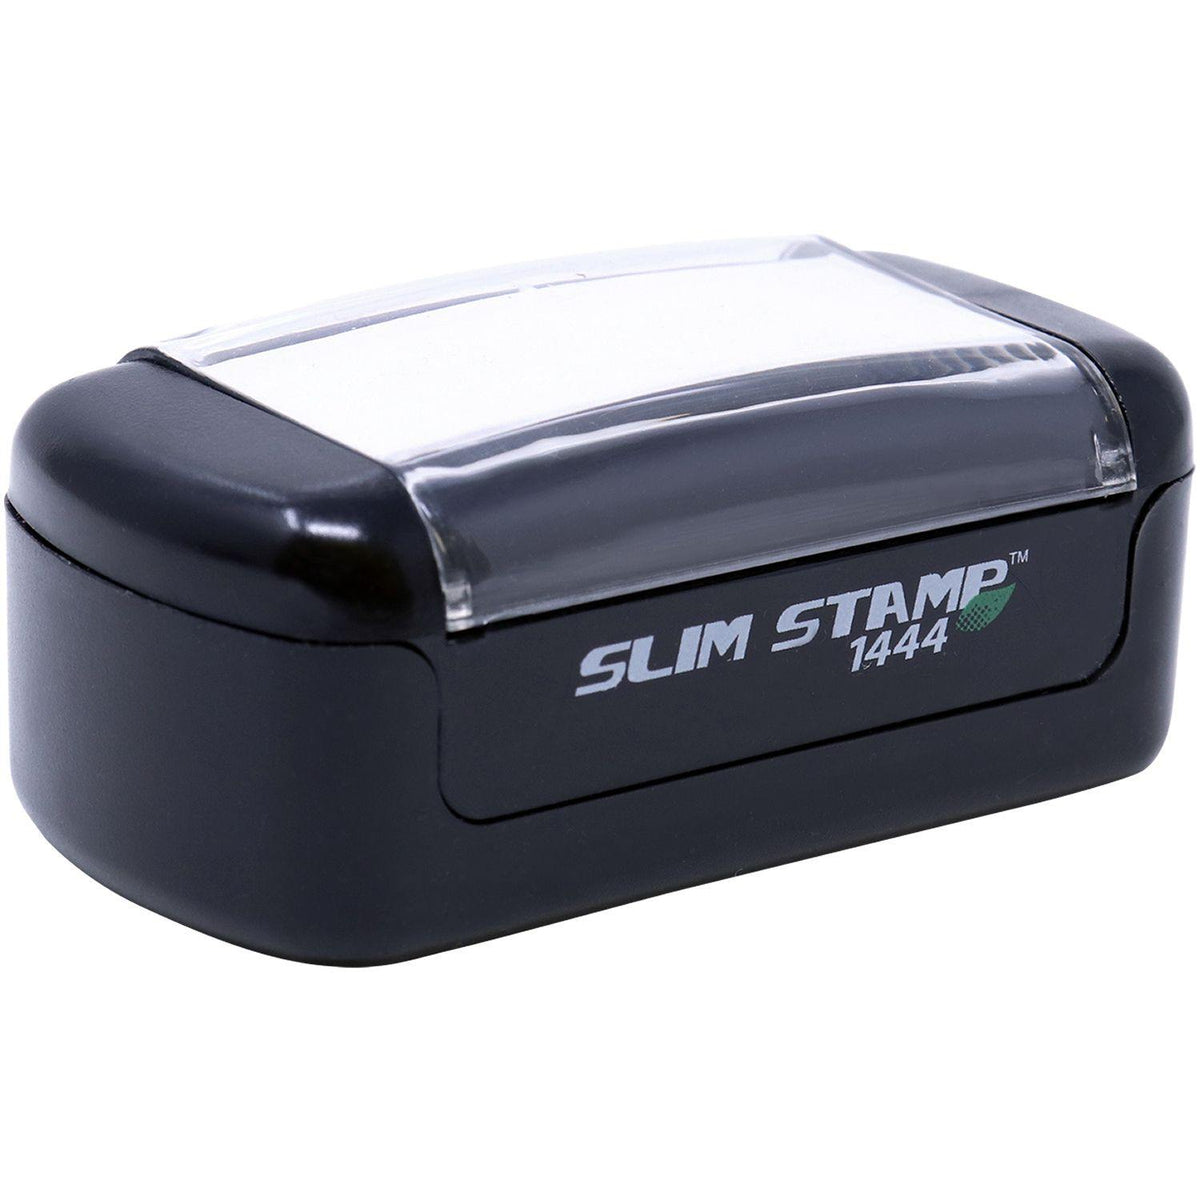 Slim Pre-Inked Bold Physical Due Stamp - Engineer Seal Stamps - Brand_Slim, Impression Size_Small, Stamp Type_Pre-Inked Stamp, Type of Use_Medical Office